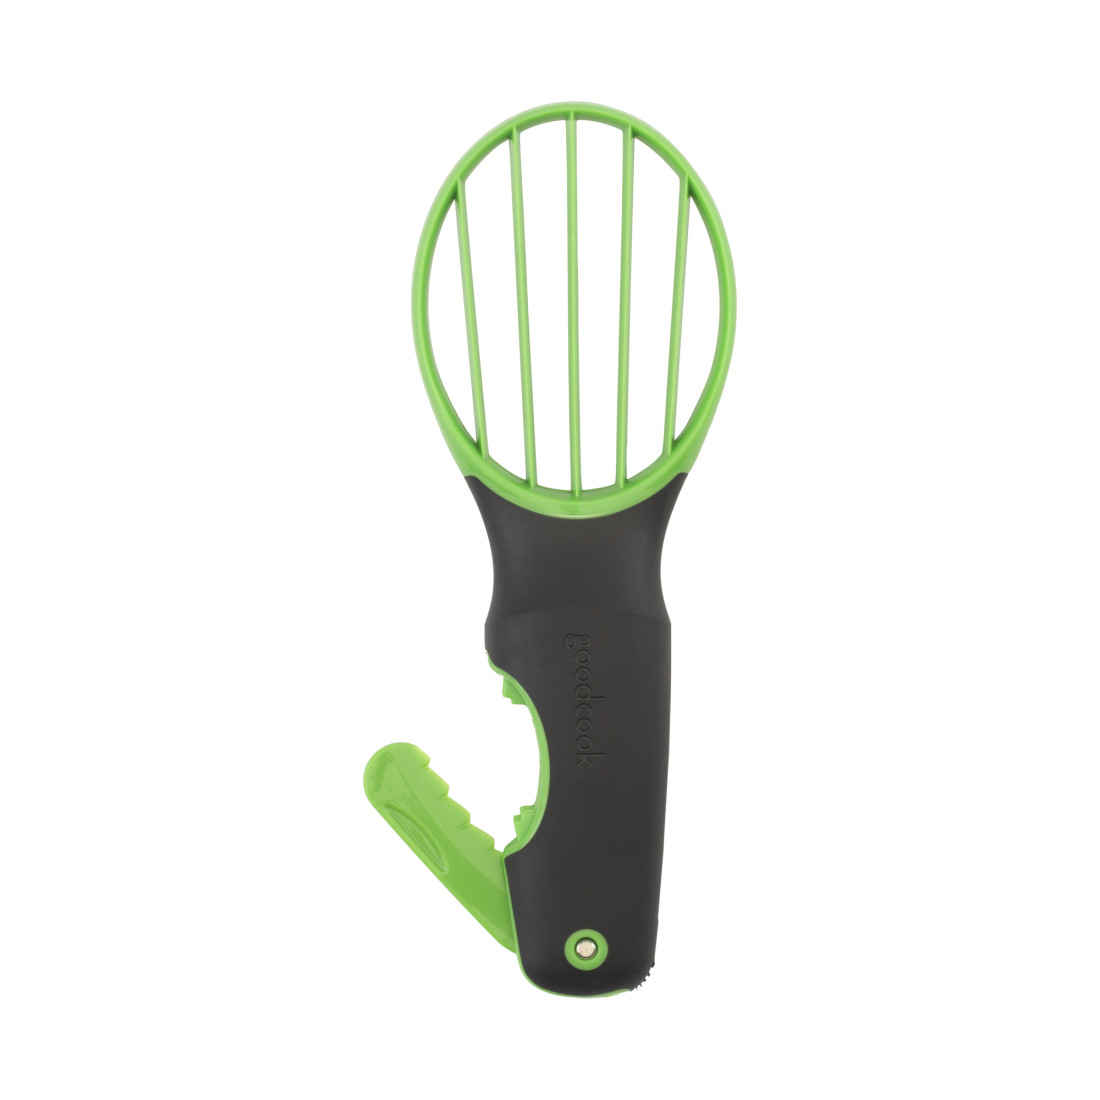 Waloo 3 in 1 Avocado Slicer and Pitter Tool Green Edition Waloo Home